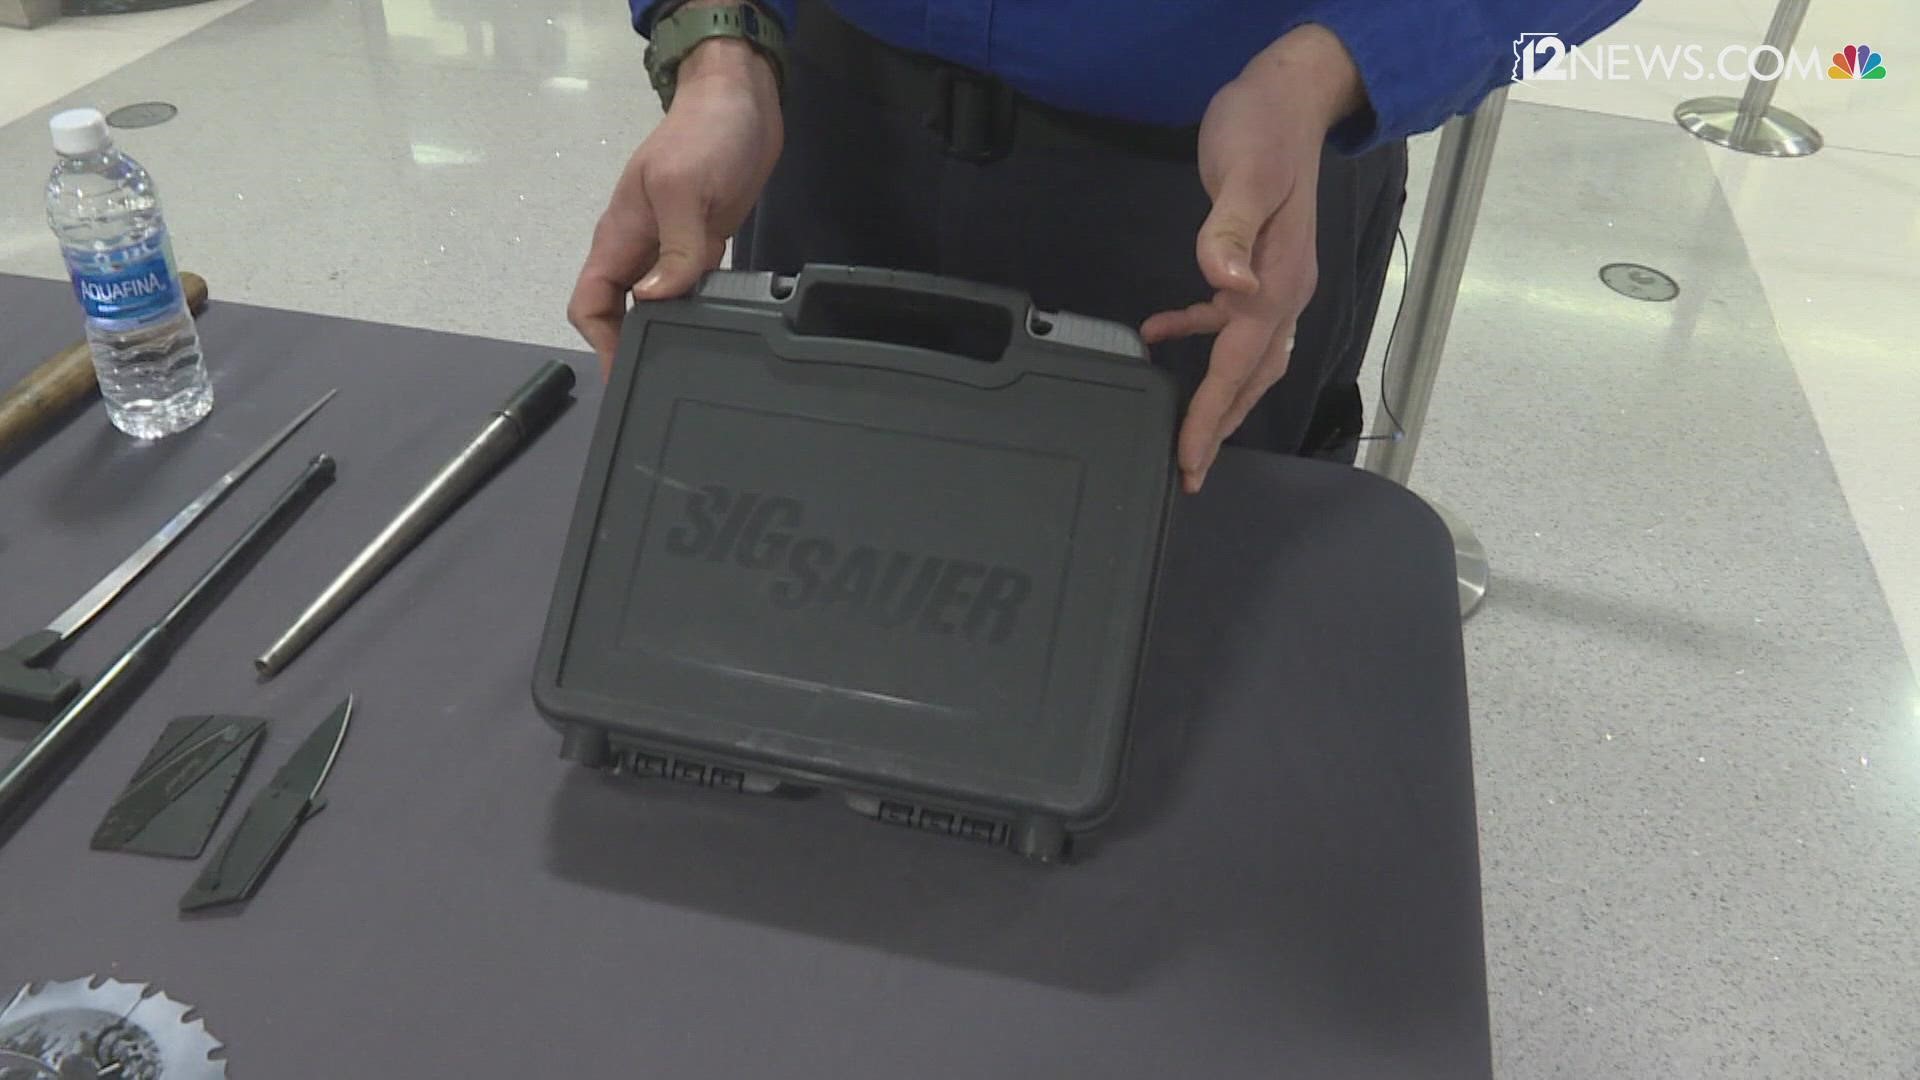 A TSA official walks us through how to properly pack a firearm in your luggage.